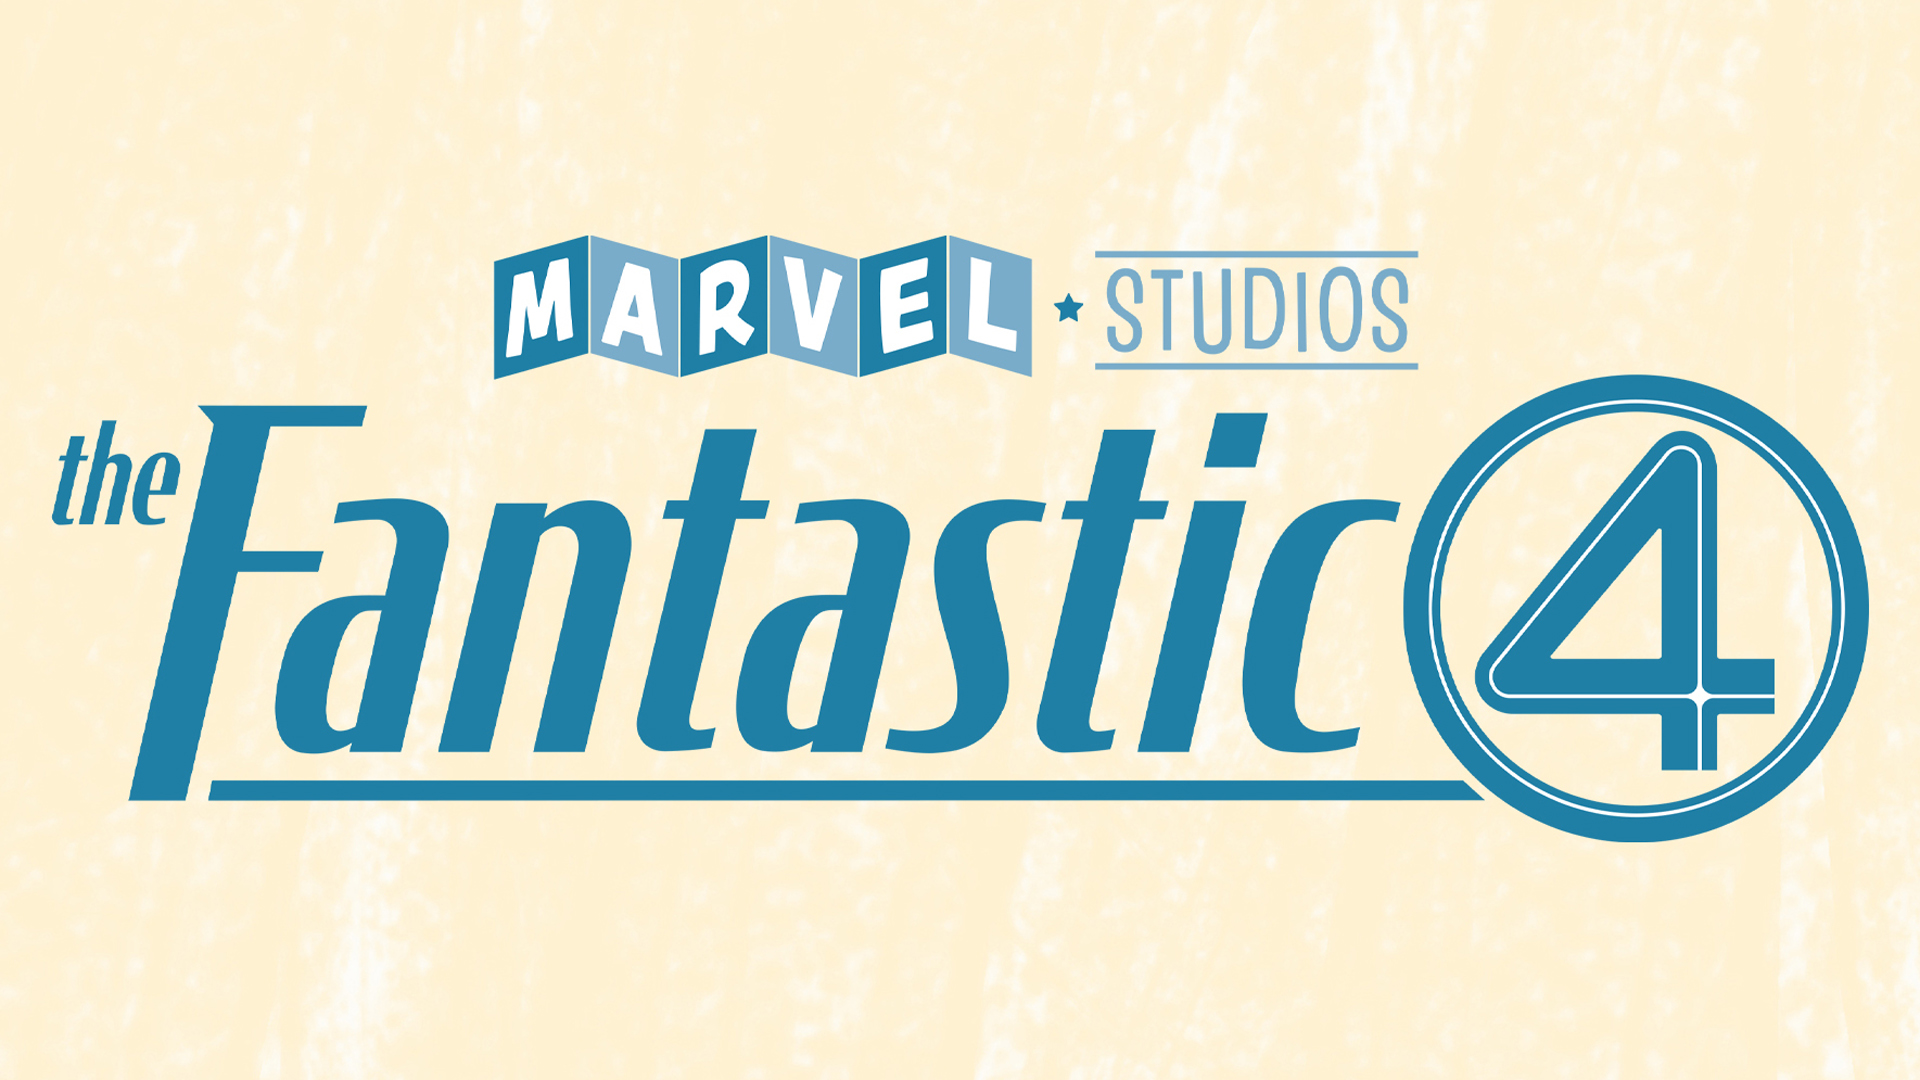 A screenshot of the official art for Marvel Studios' Fantastic Four movie.